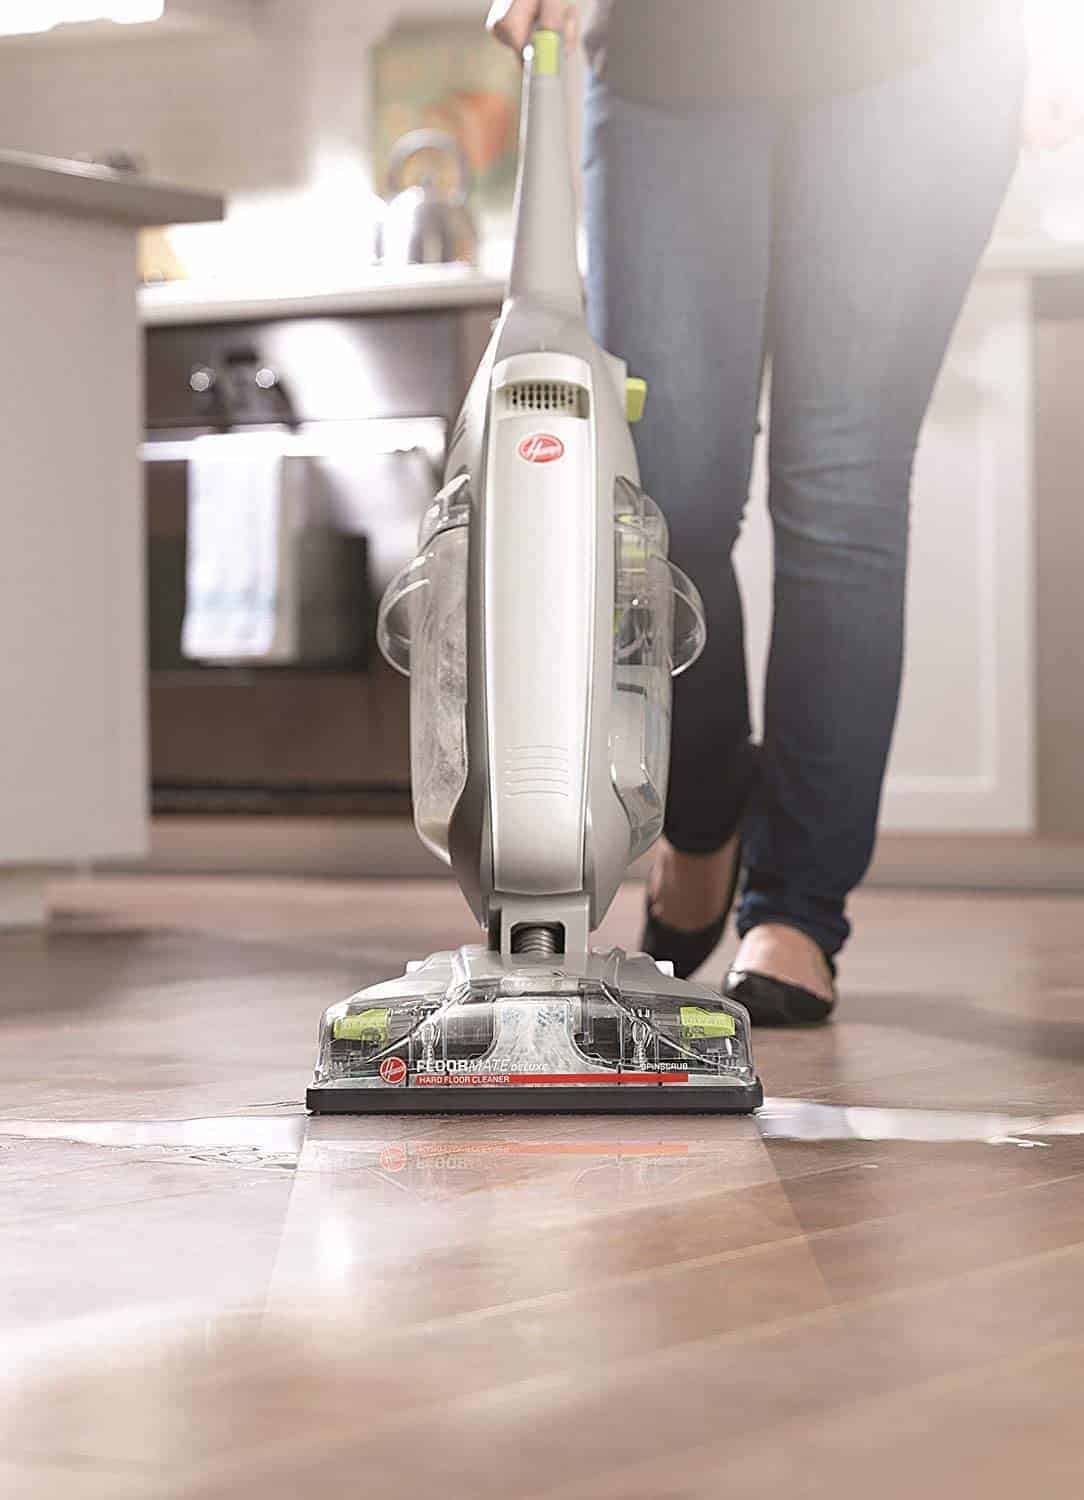 Best upright vacuum for hardwood floors: Hoover FloorMate Deluxe FH40160PC